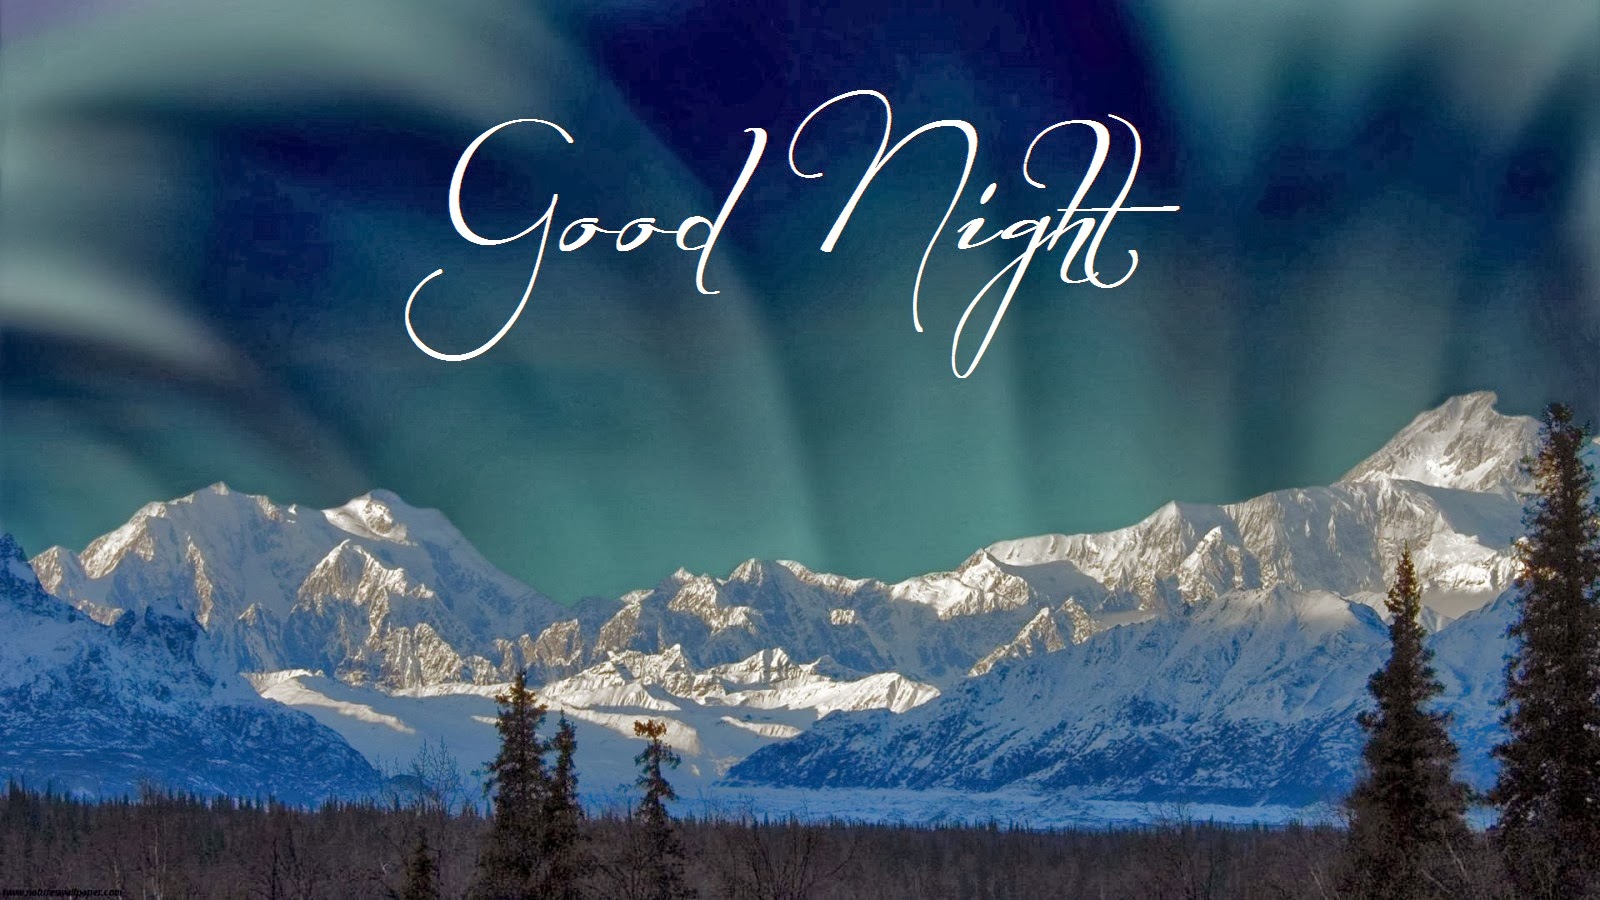 Good Night Sms Archives - About Good Morning , Good Night ...